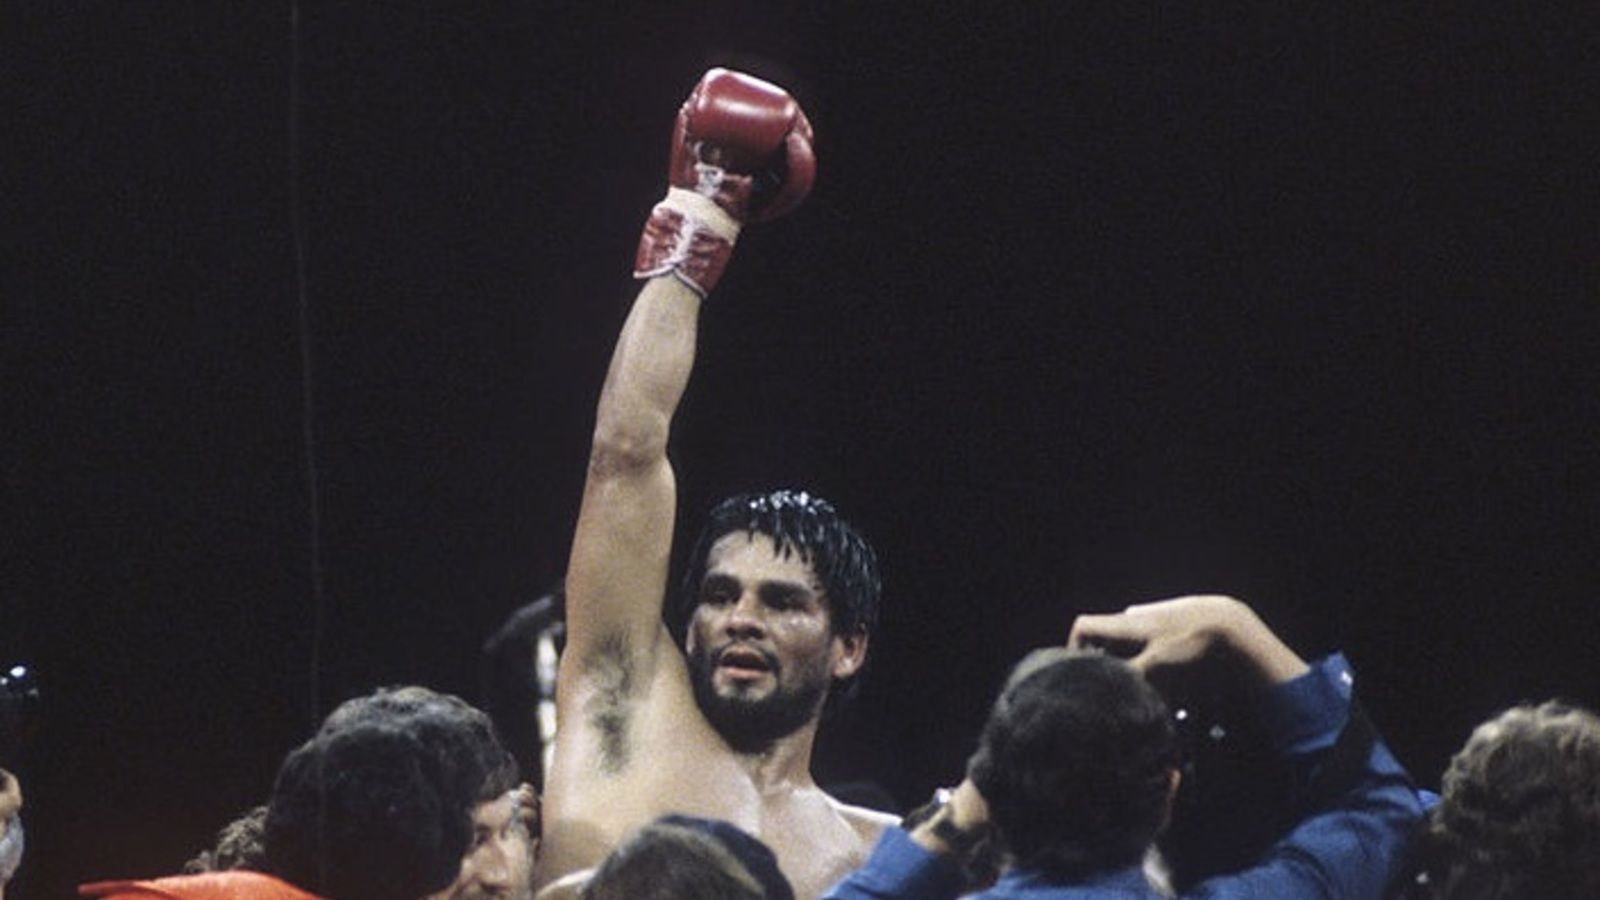 great moments in the career of Roberto Duran